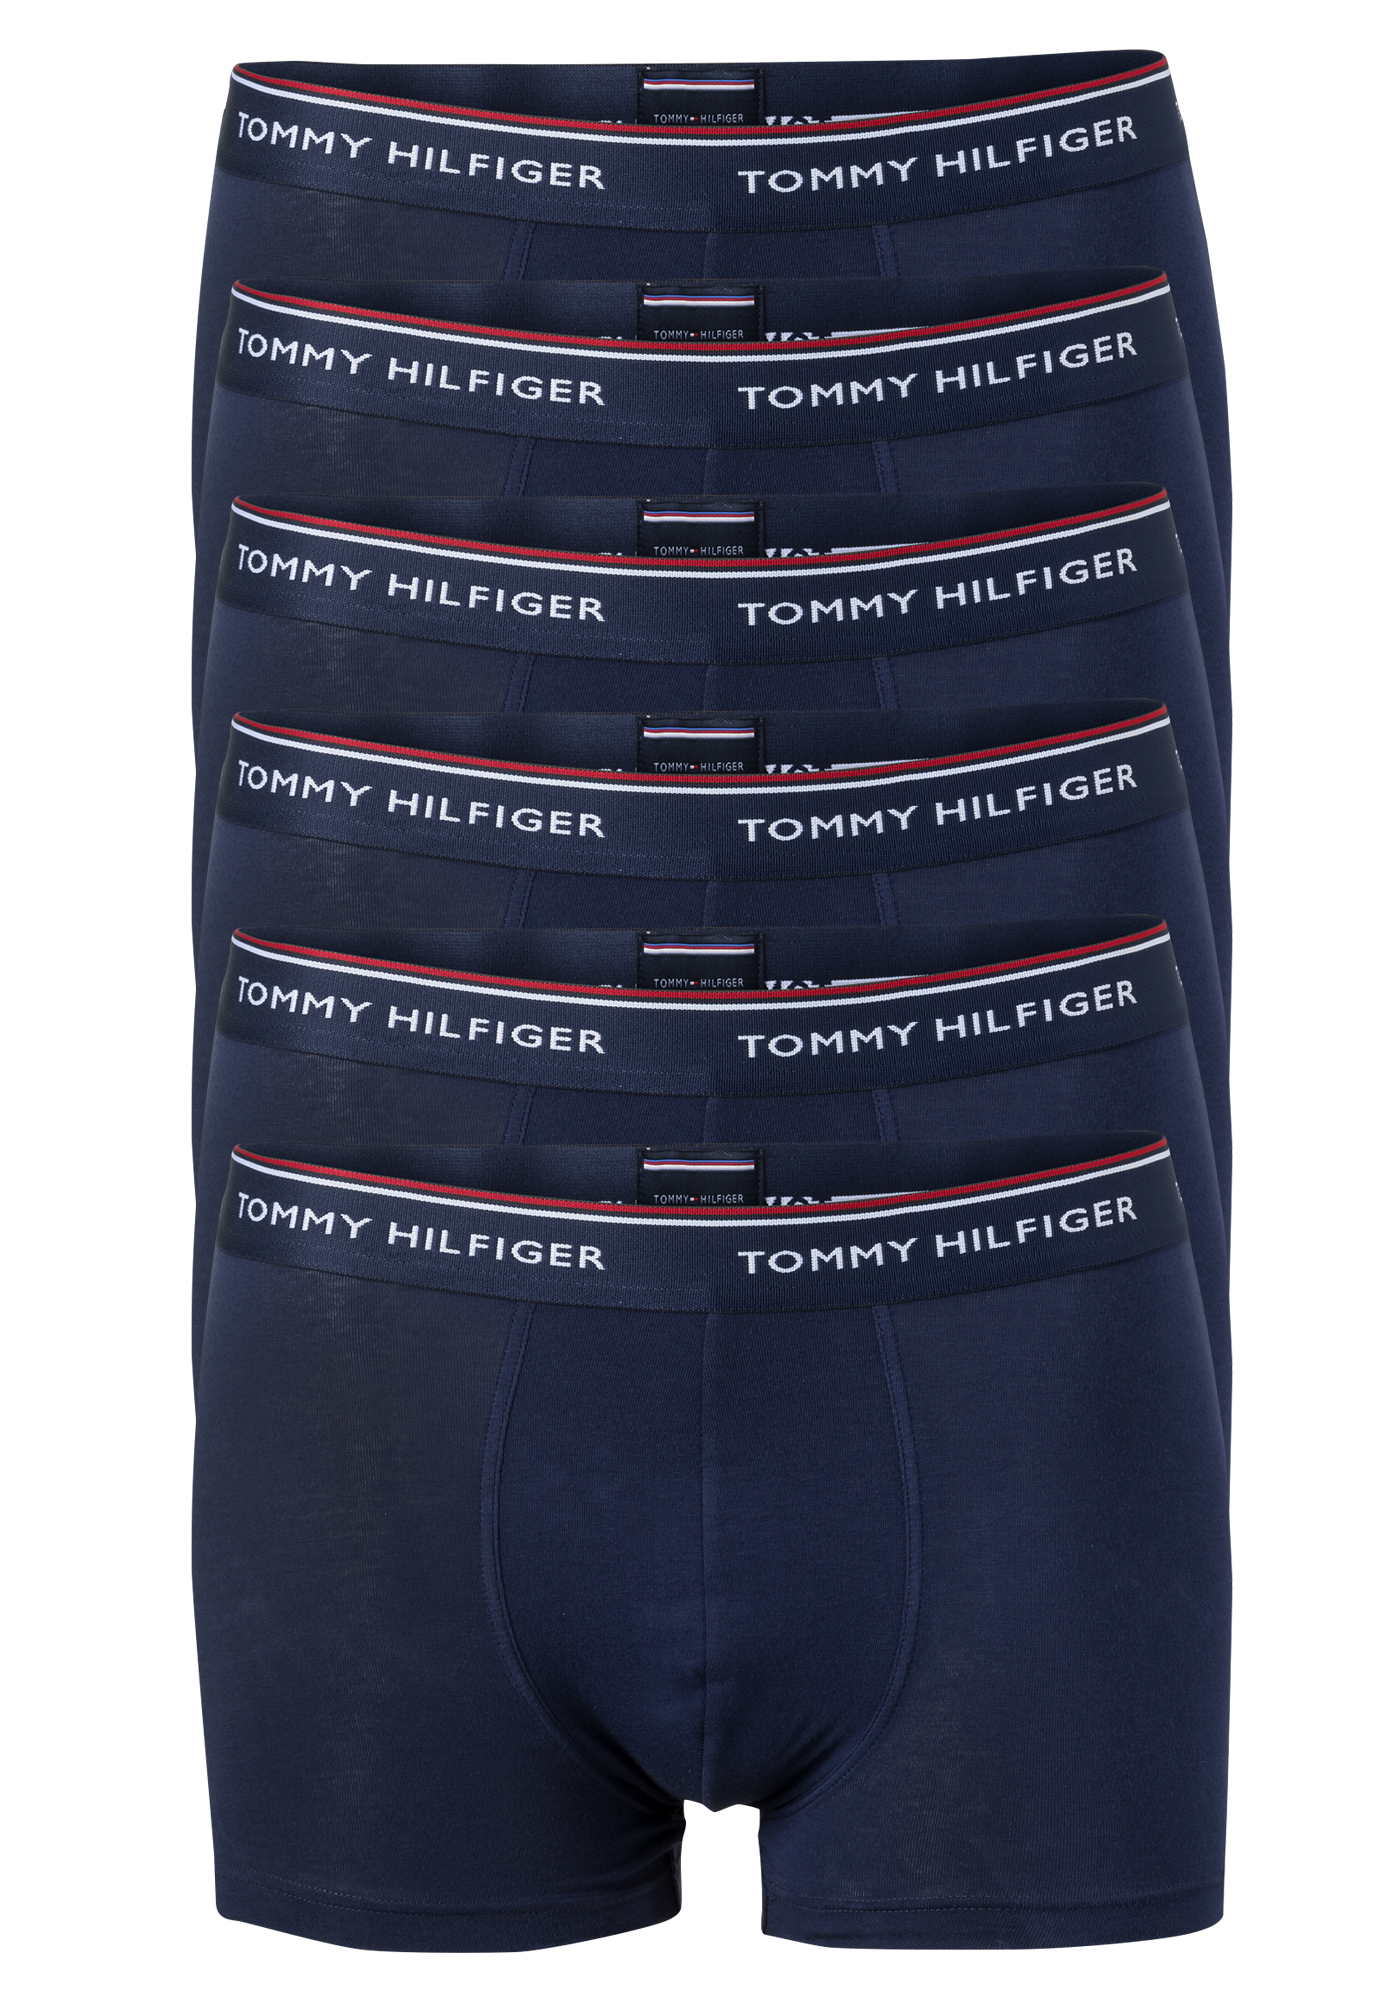 Tommy Hilfiger trunks (2x 3-pack), heren boxers normale lengte, blauw